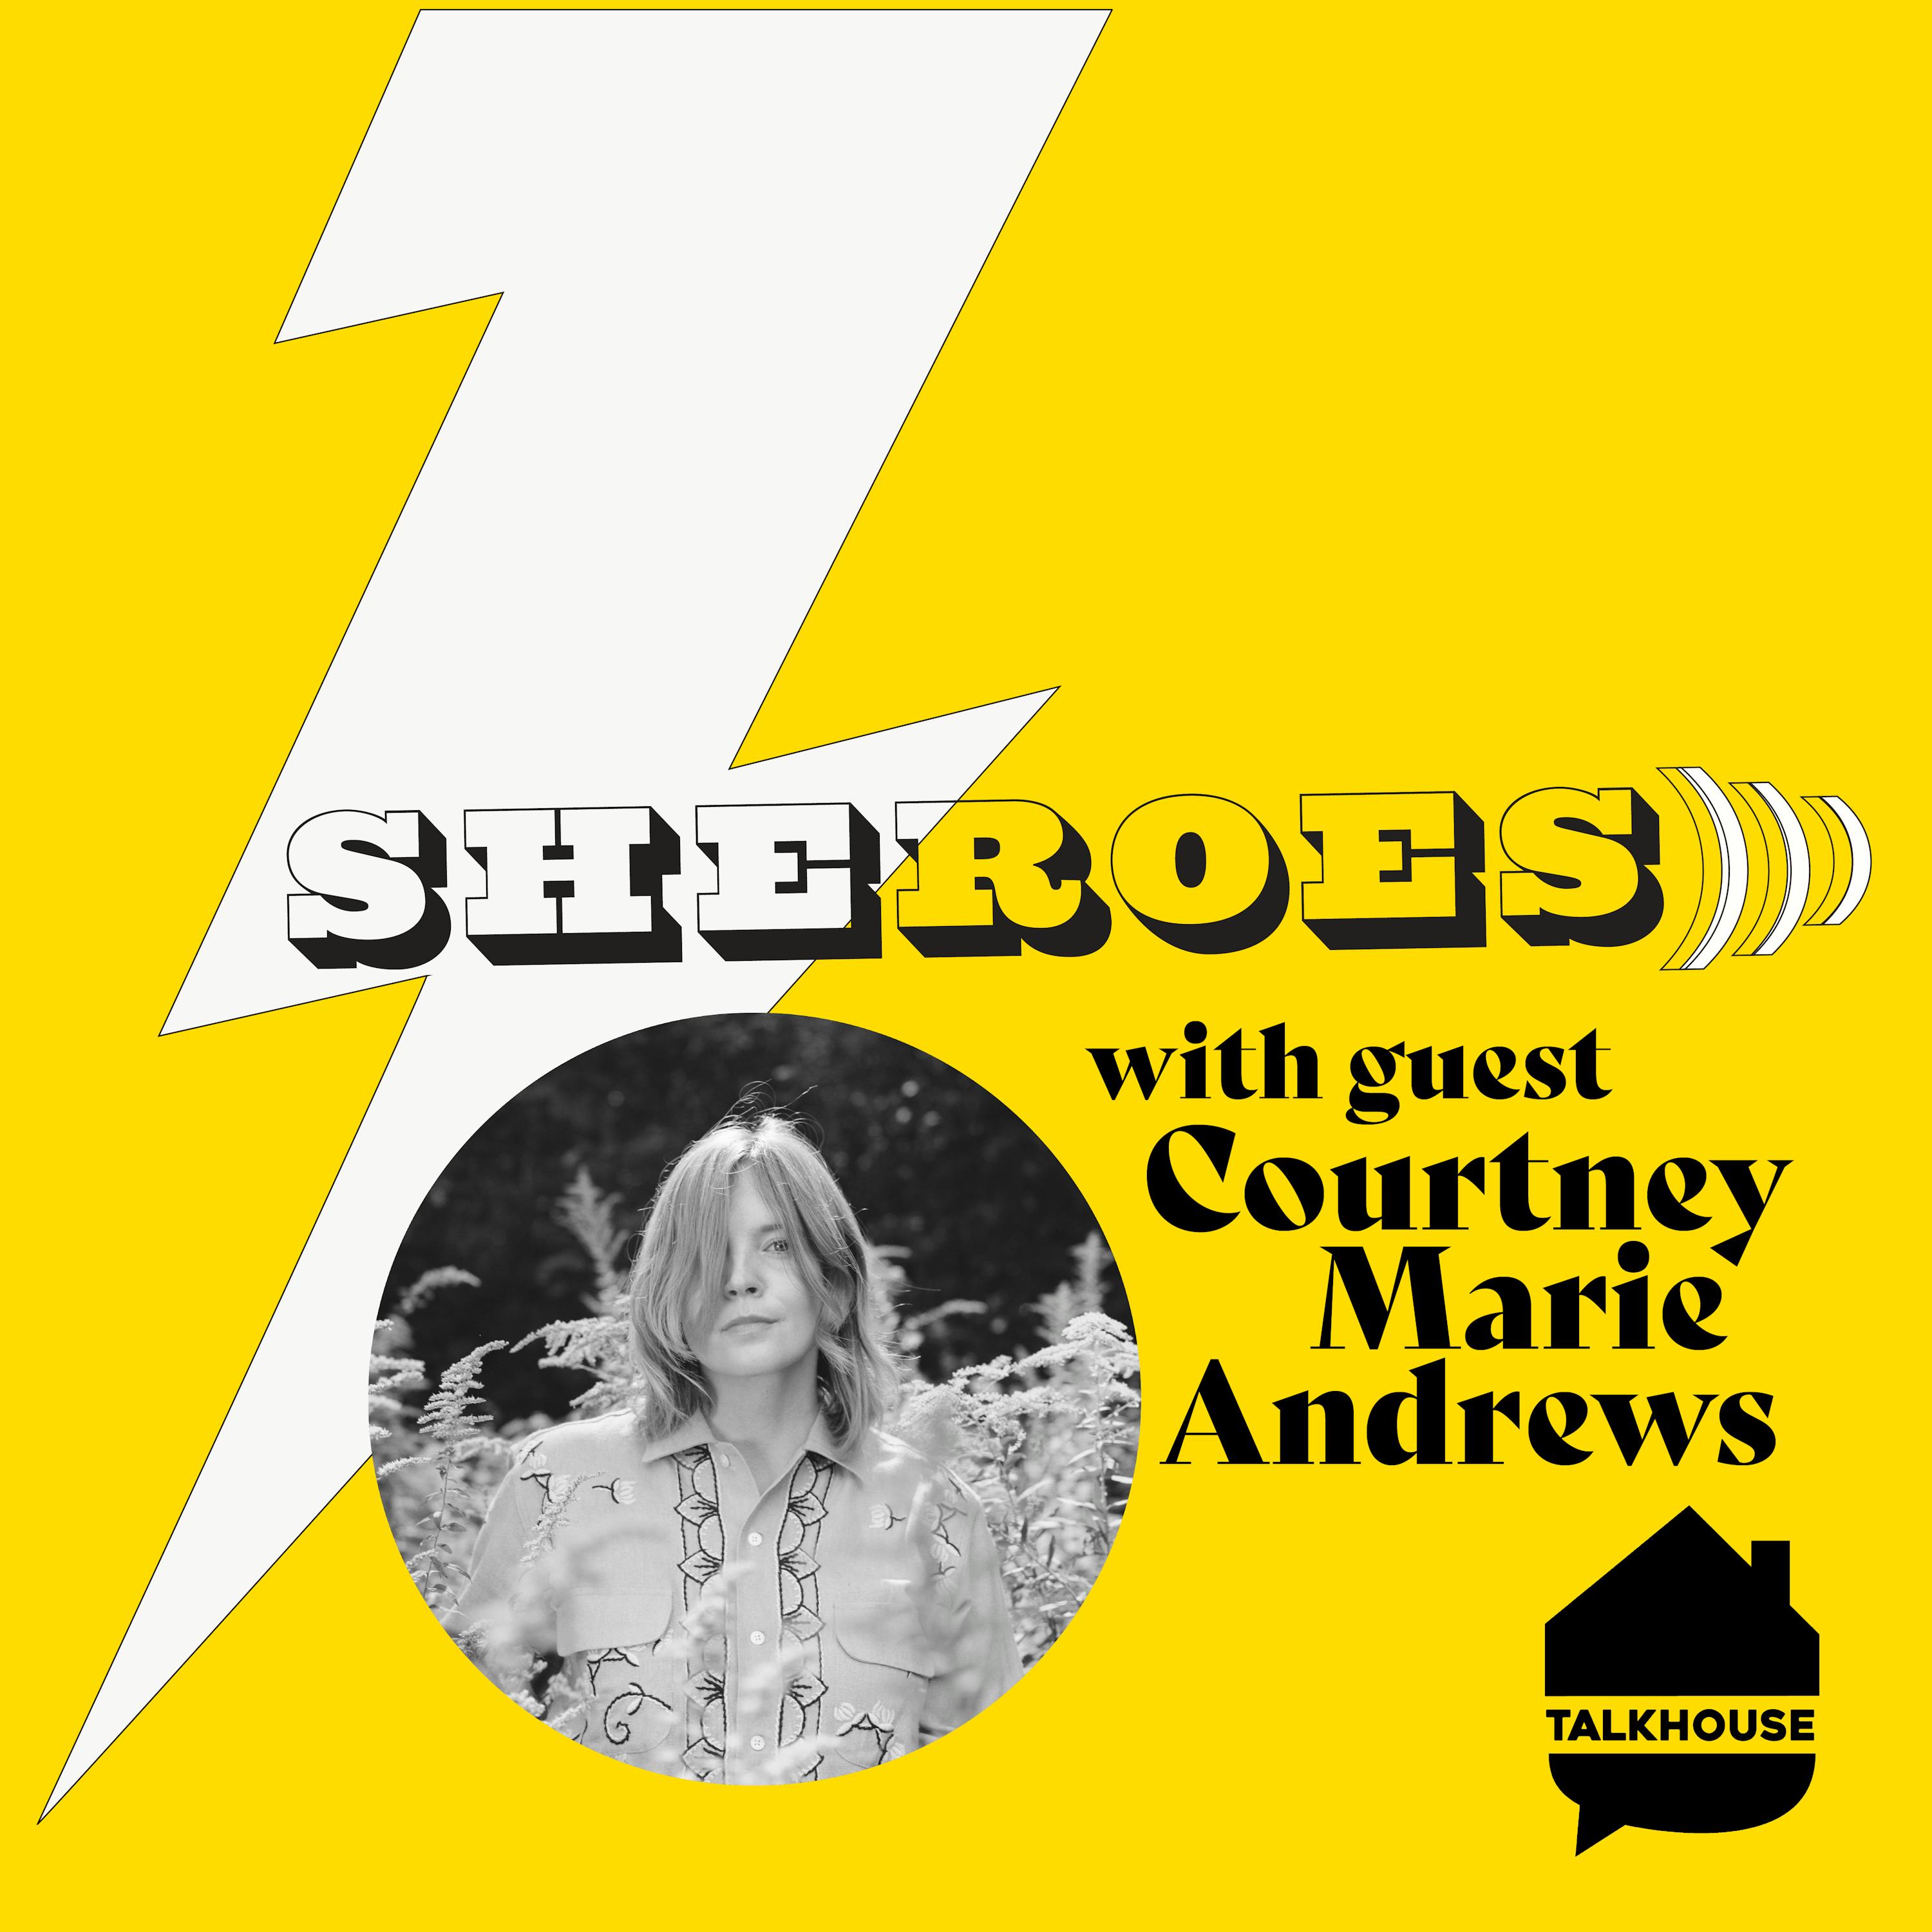 A SHERO's Journey: Courtney Marie Andrews